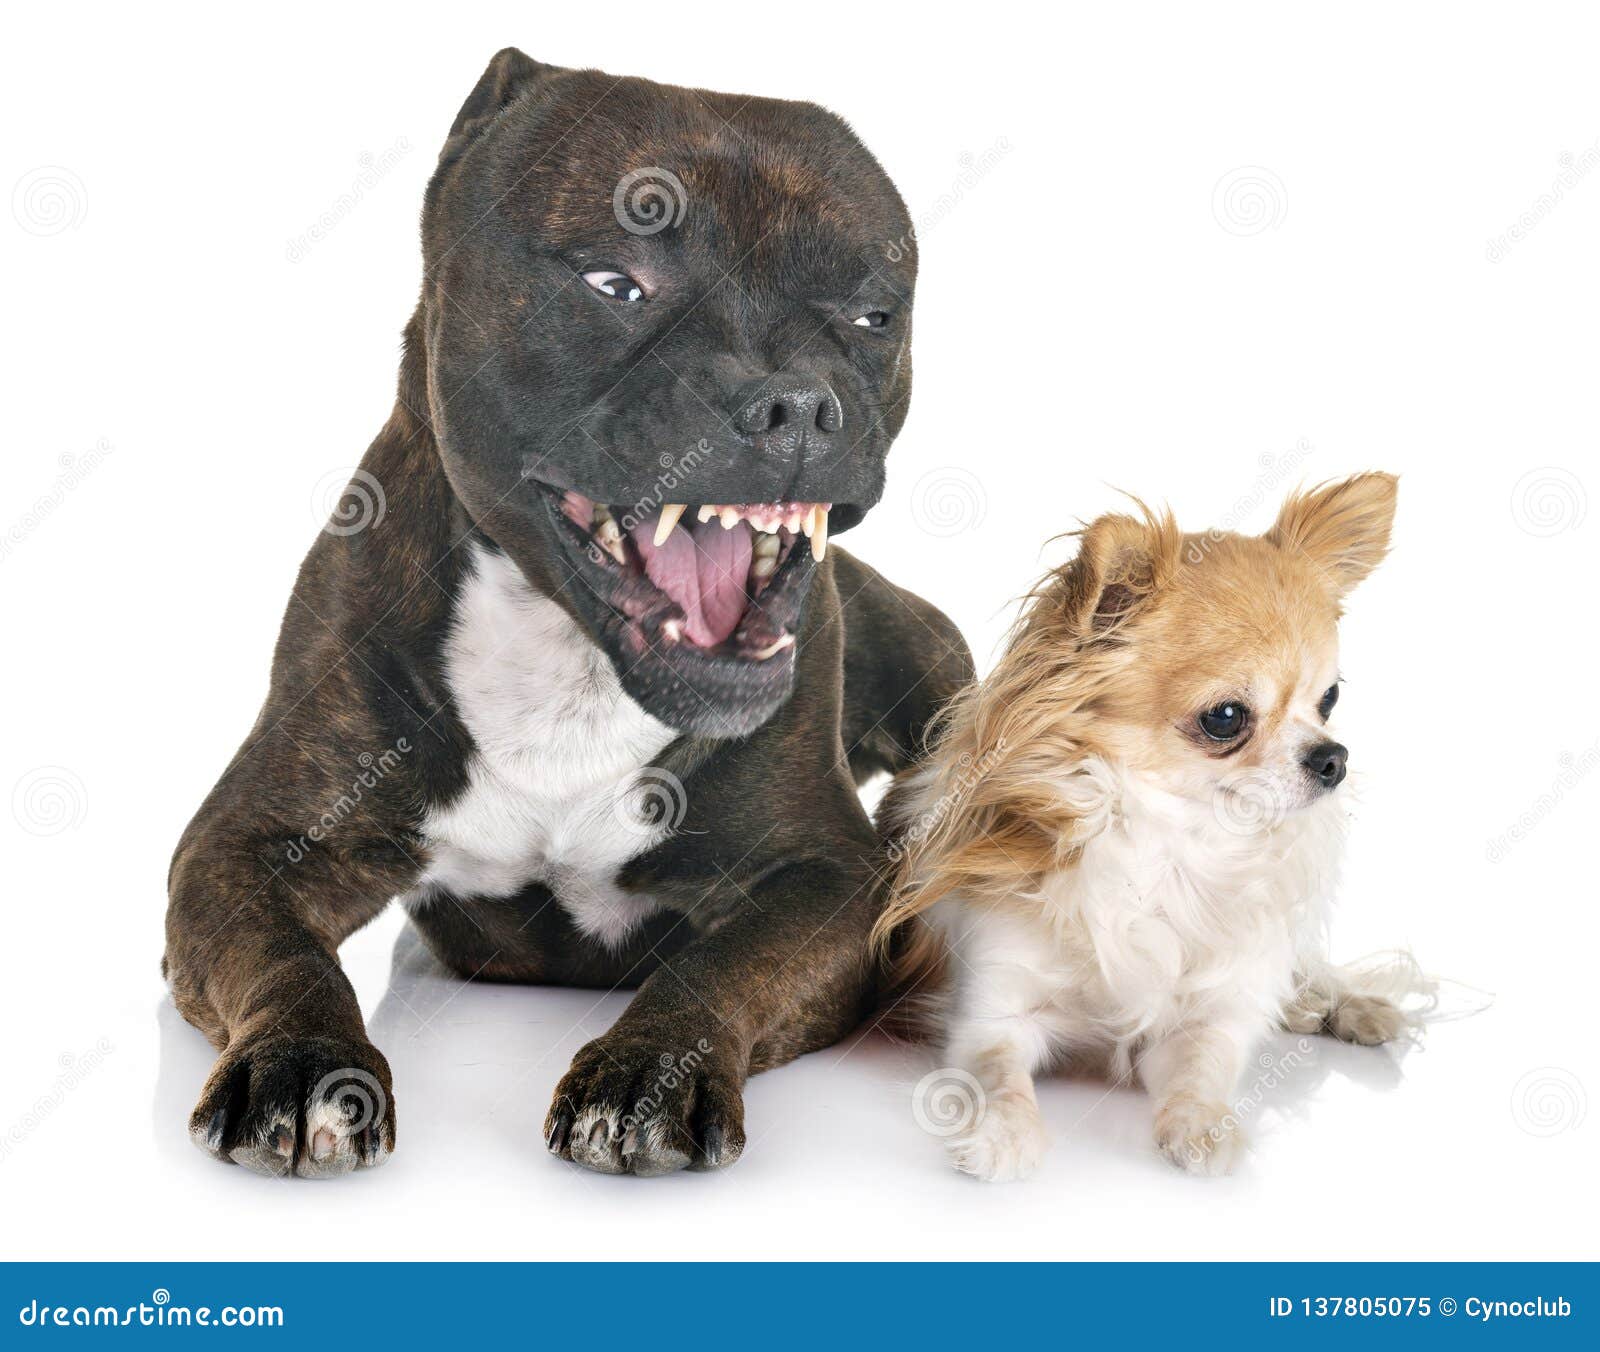 Staffordshire Bull Terrier and Chihuahua Stock Image - chihuahua, white: 137805075